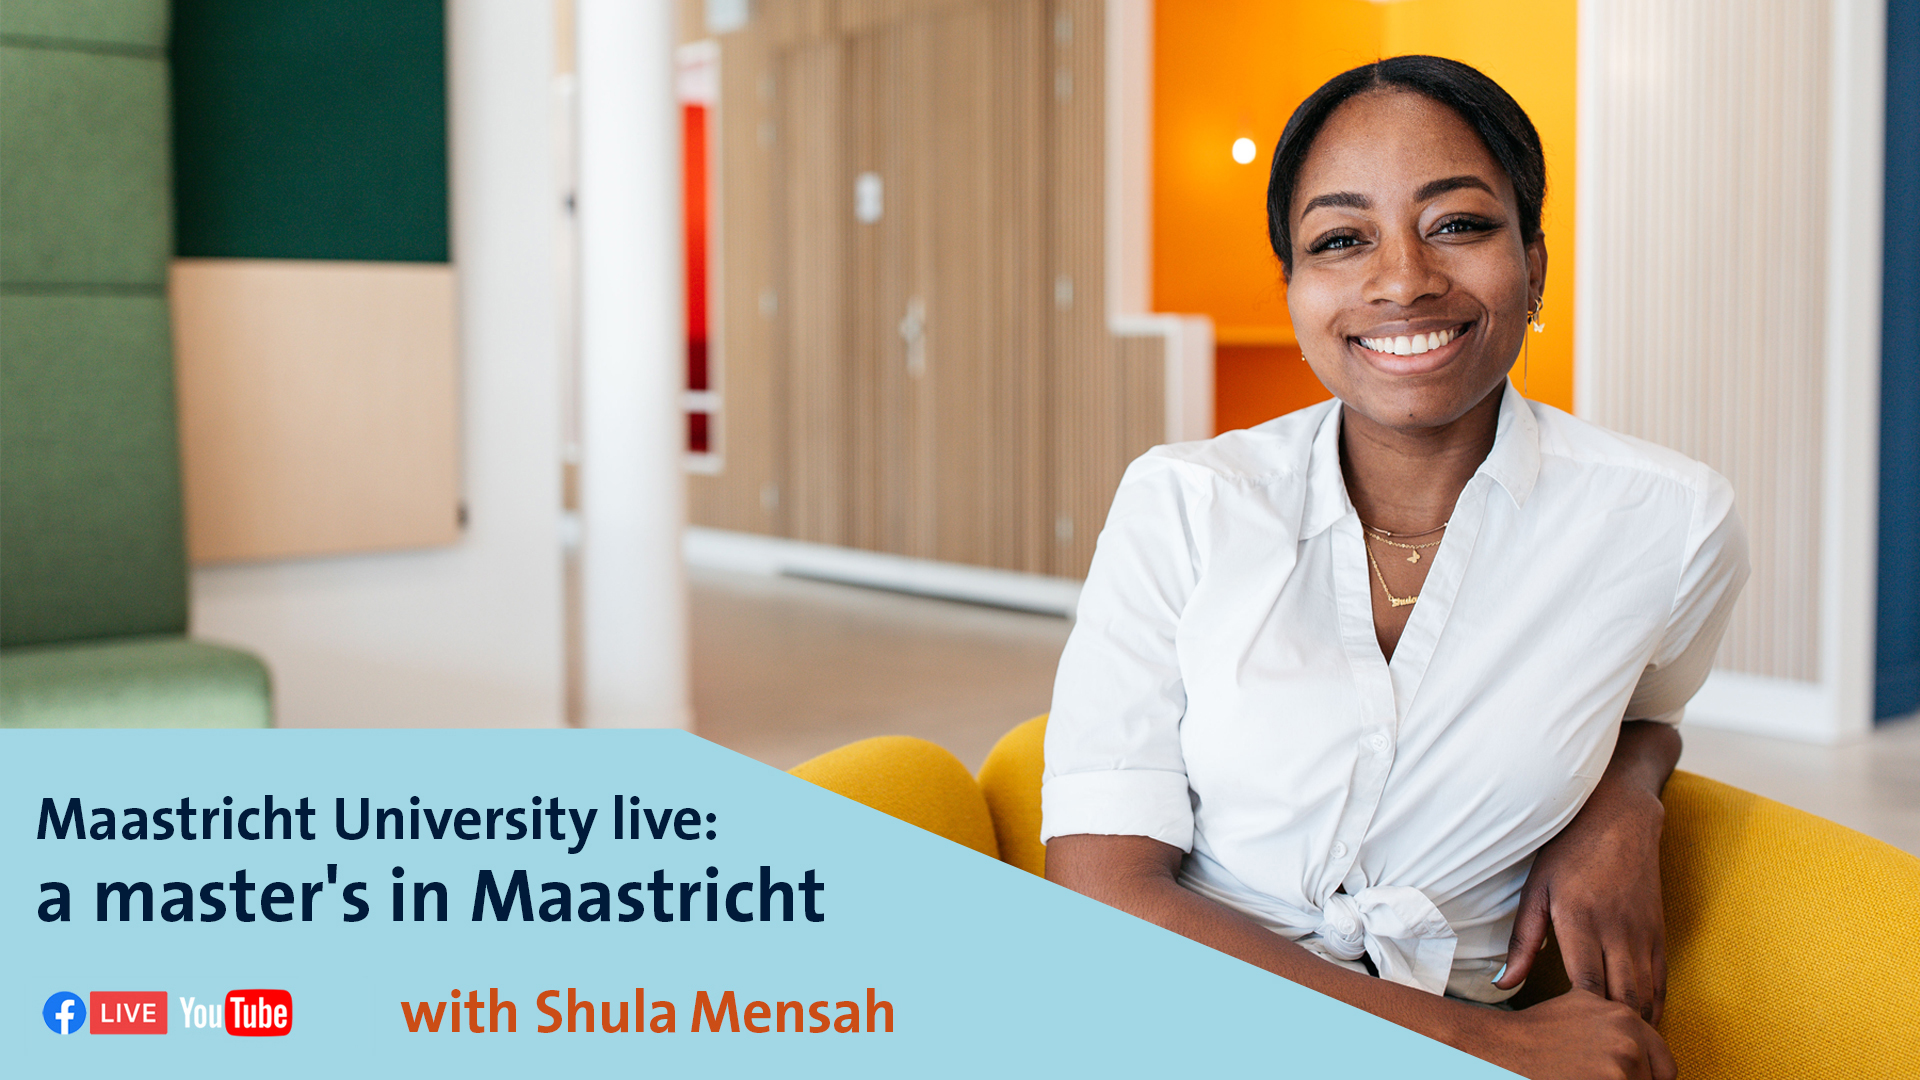 A Master's in Maastricht - presented by Shula Mensah